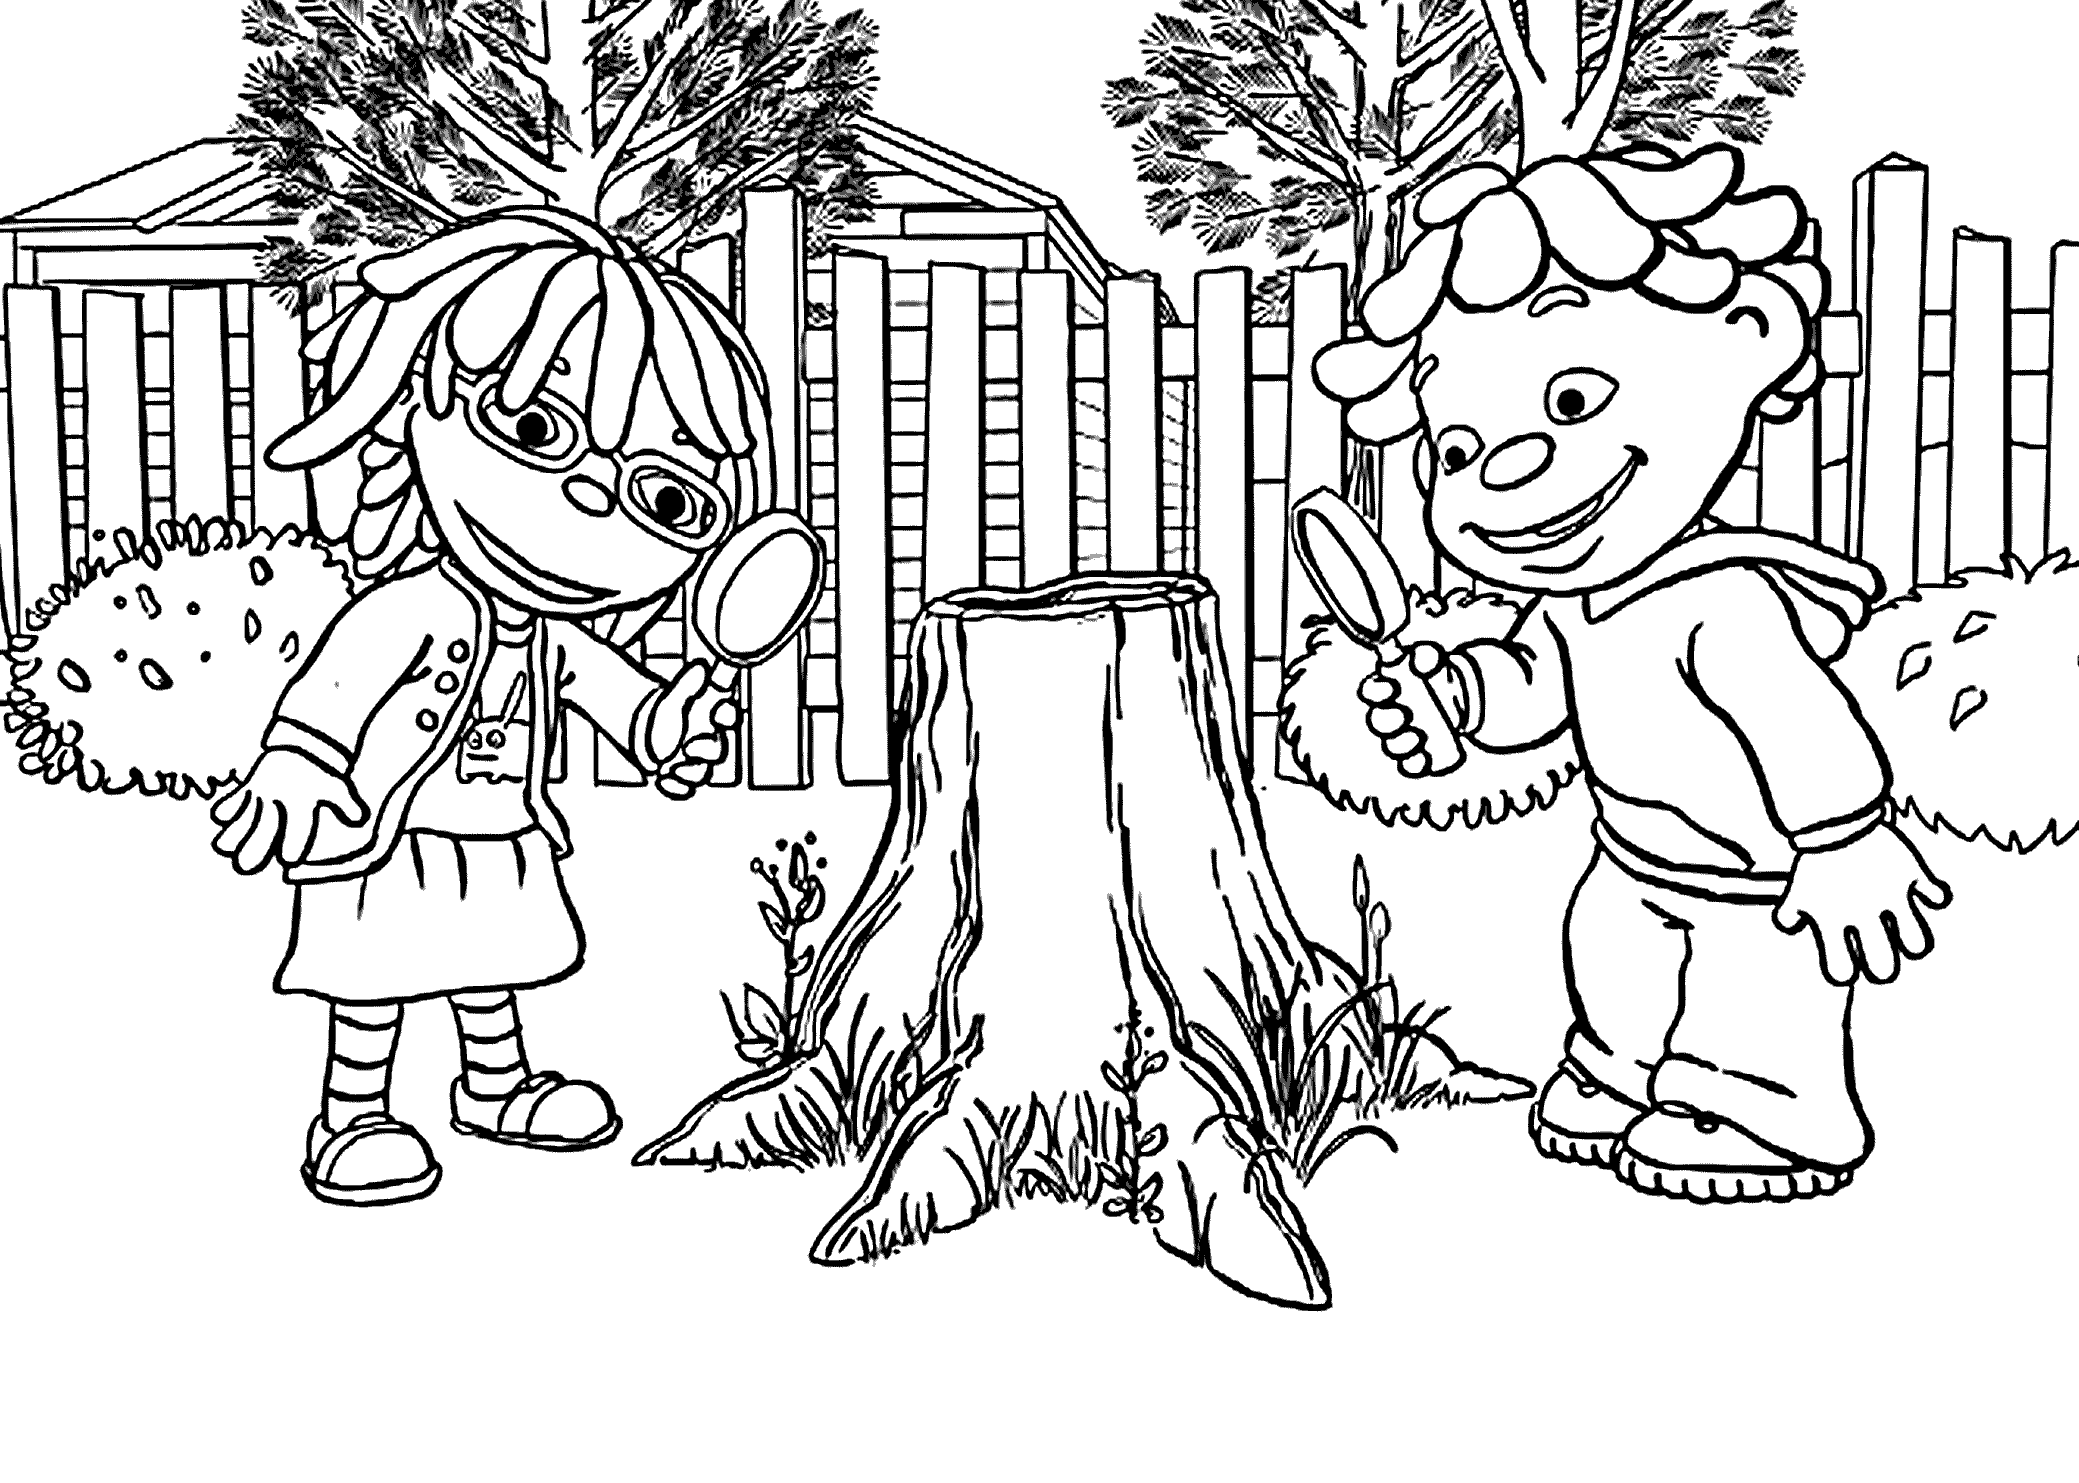 Download Sid the Science Kid Coloring Pages - Best Coloring Pages ...